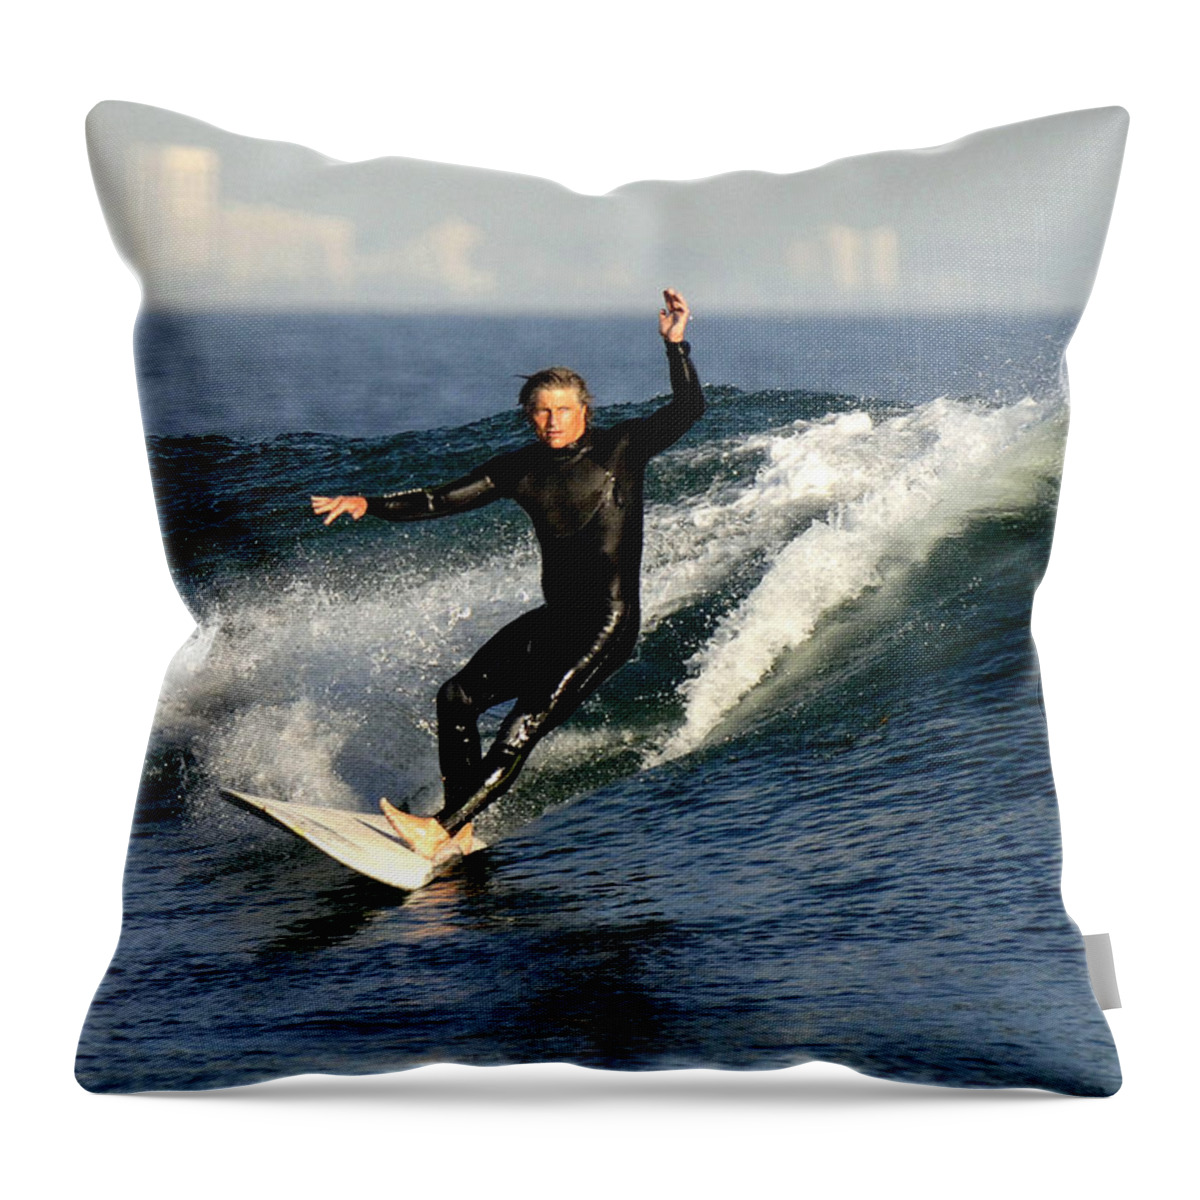 Surfing Throw Pillow featuring the photograph Surfing #1 by Marc Bittan